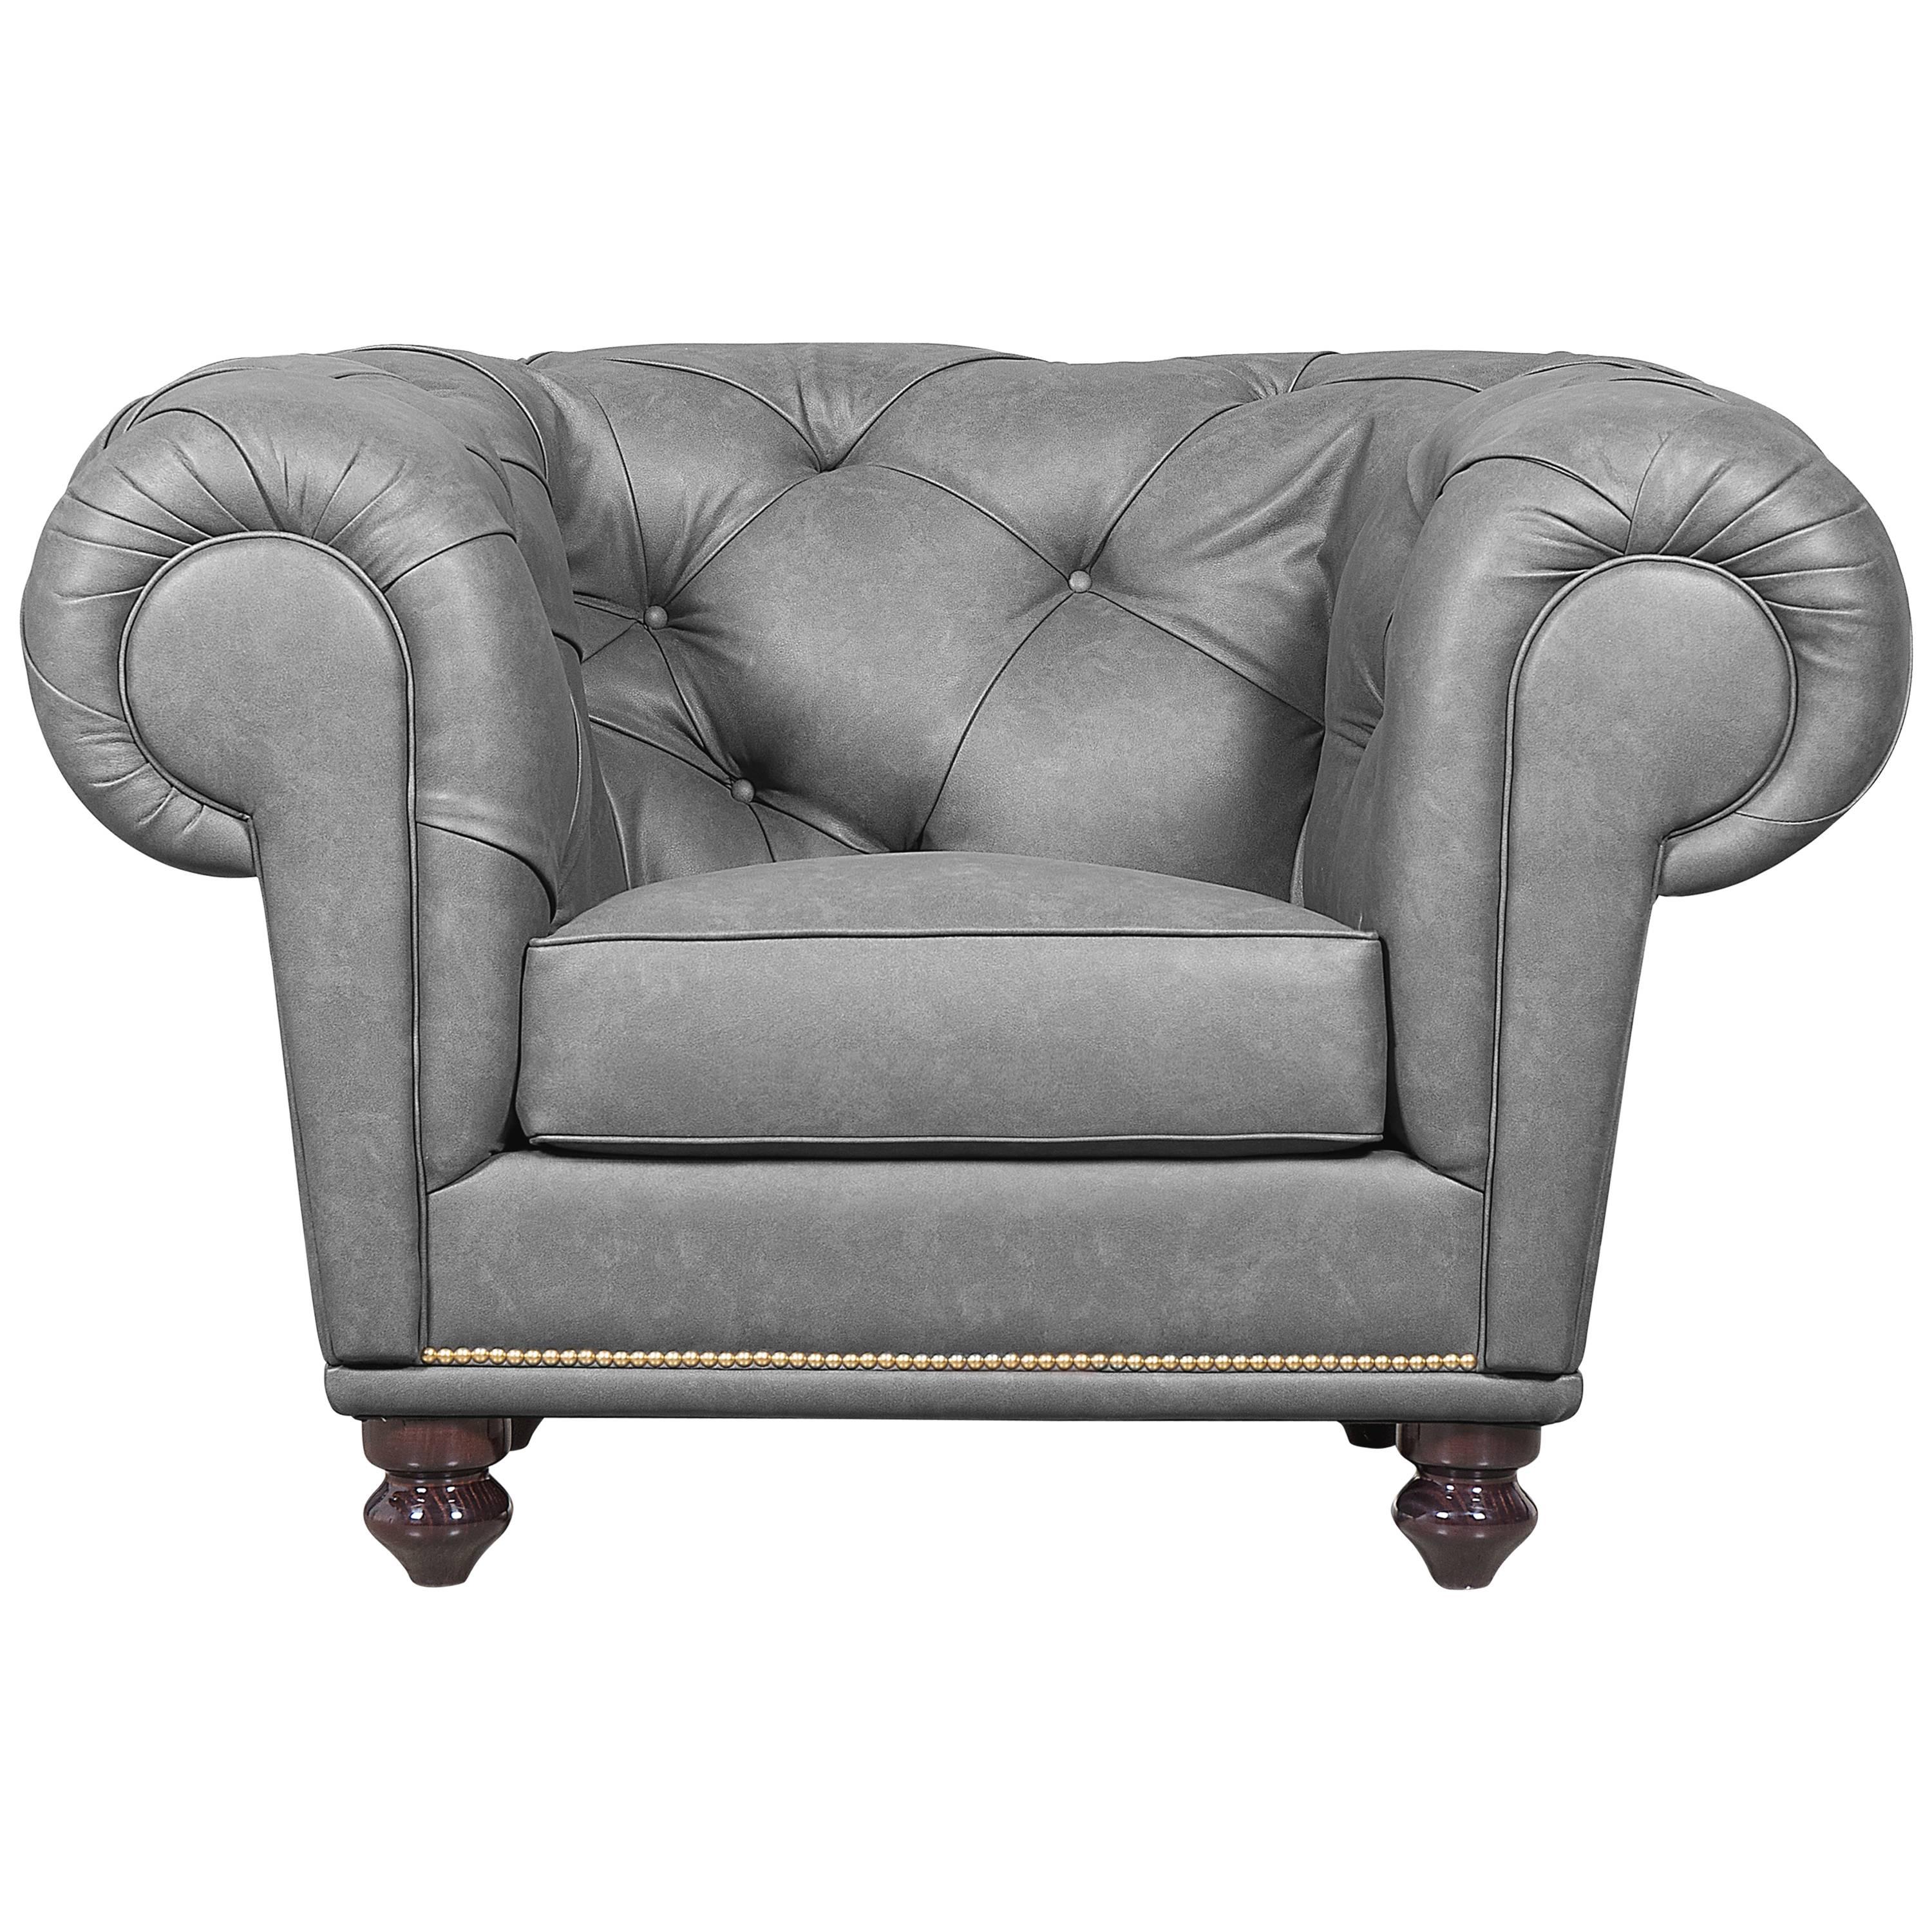 Modern Restyling of the Early 19th Century British Chesterfield Leather Armchair